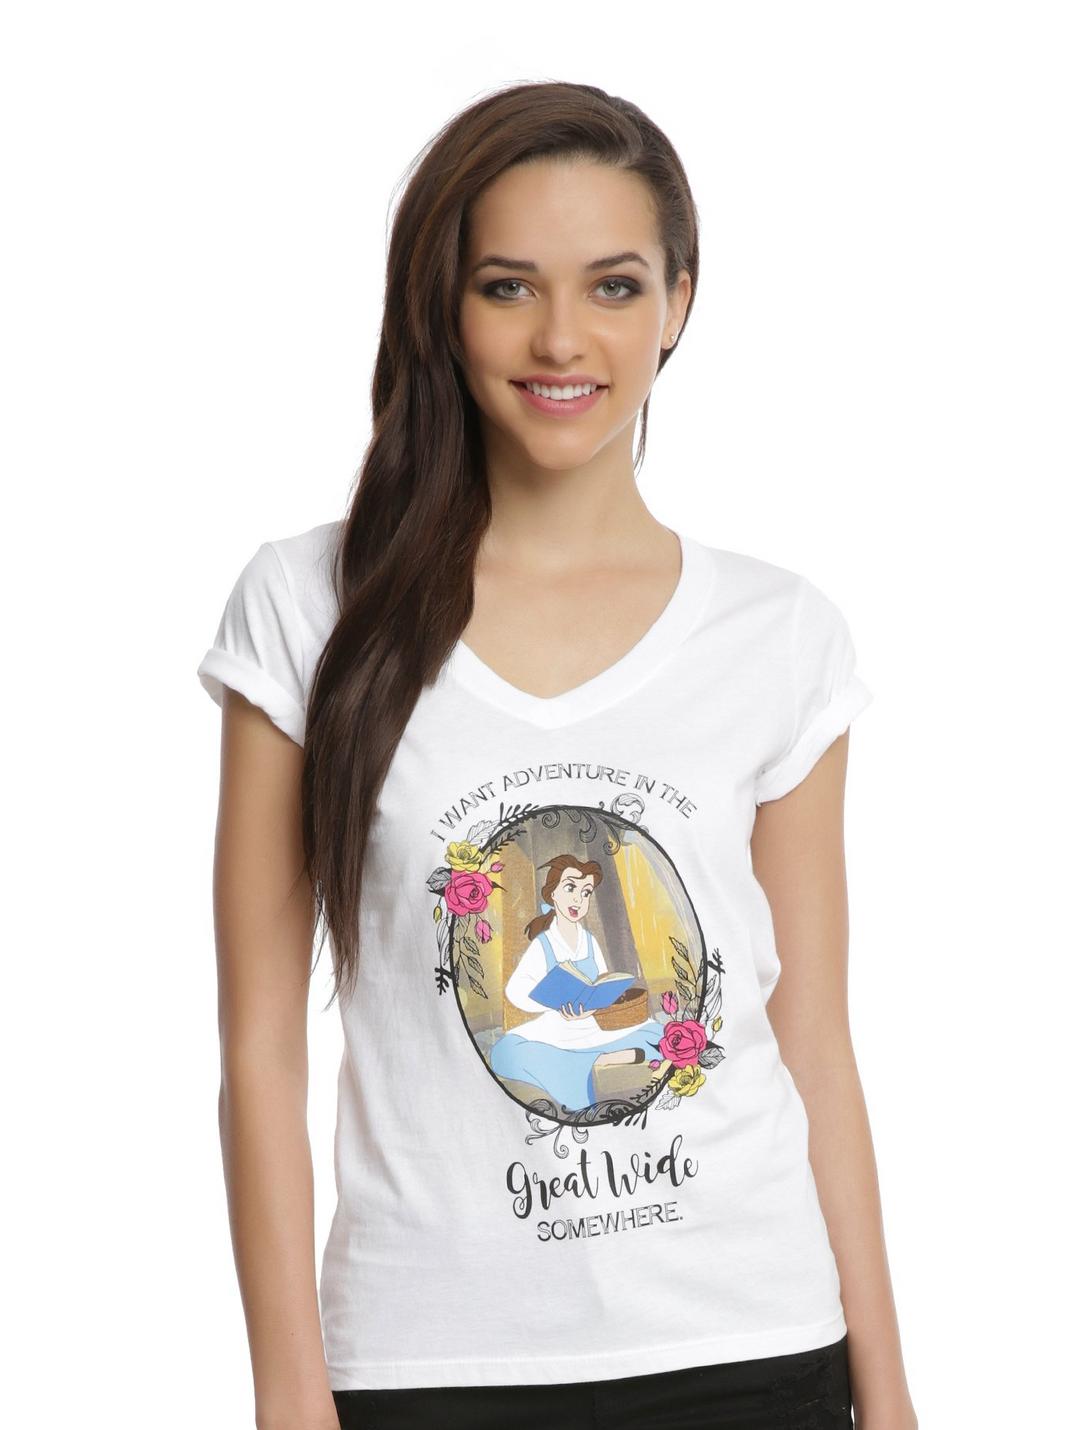 Disney Beauty And The Beast Great Wide Somewhere Girls T-Shirt, WHITE, hi-res